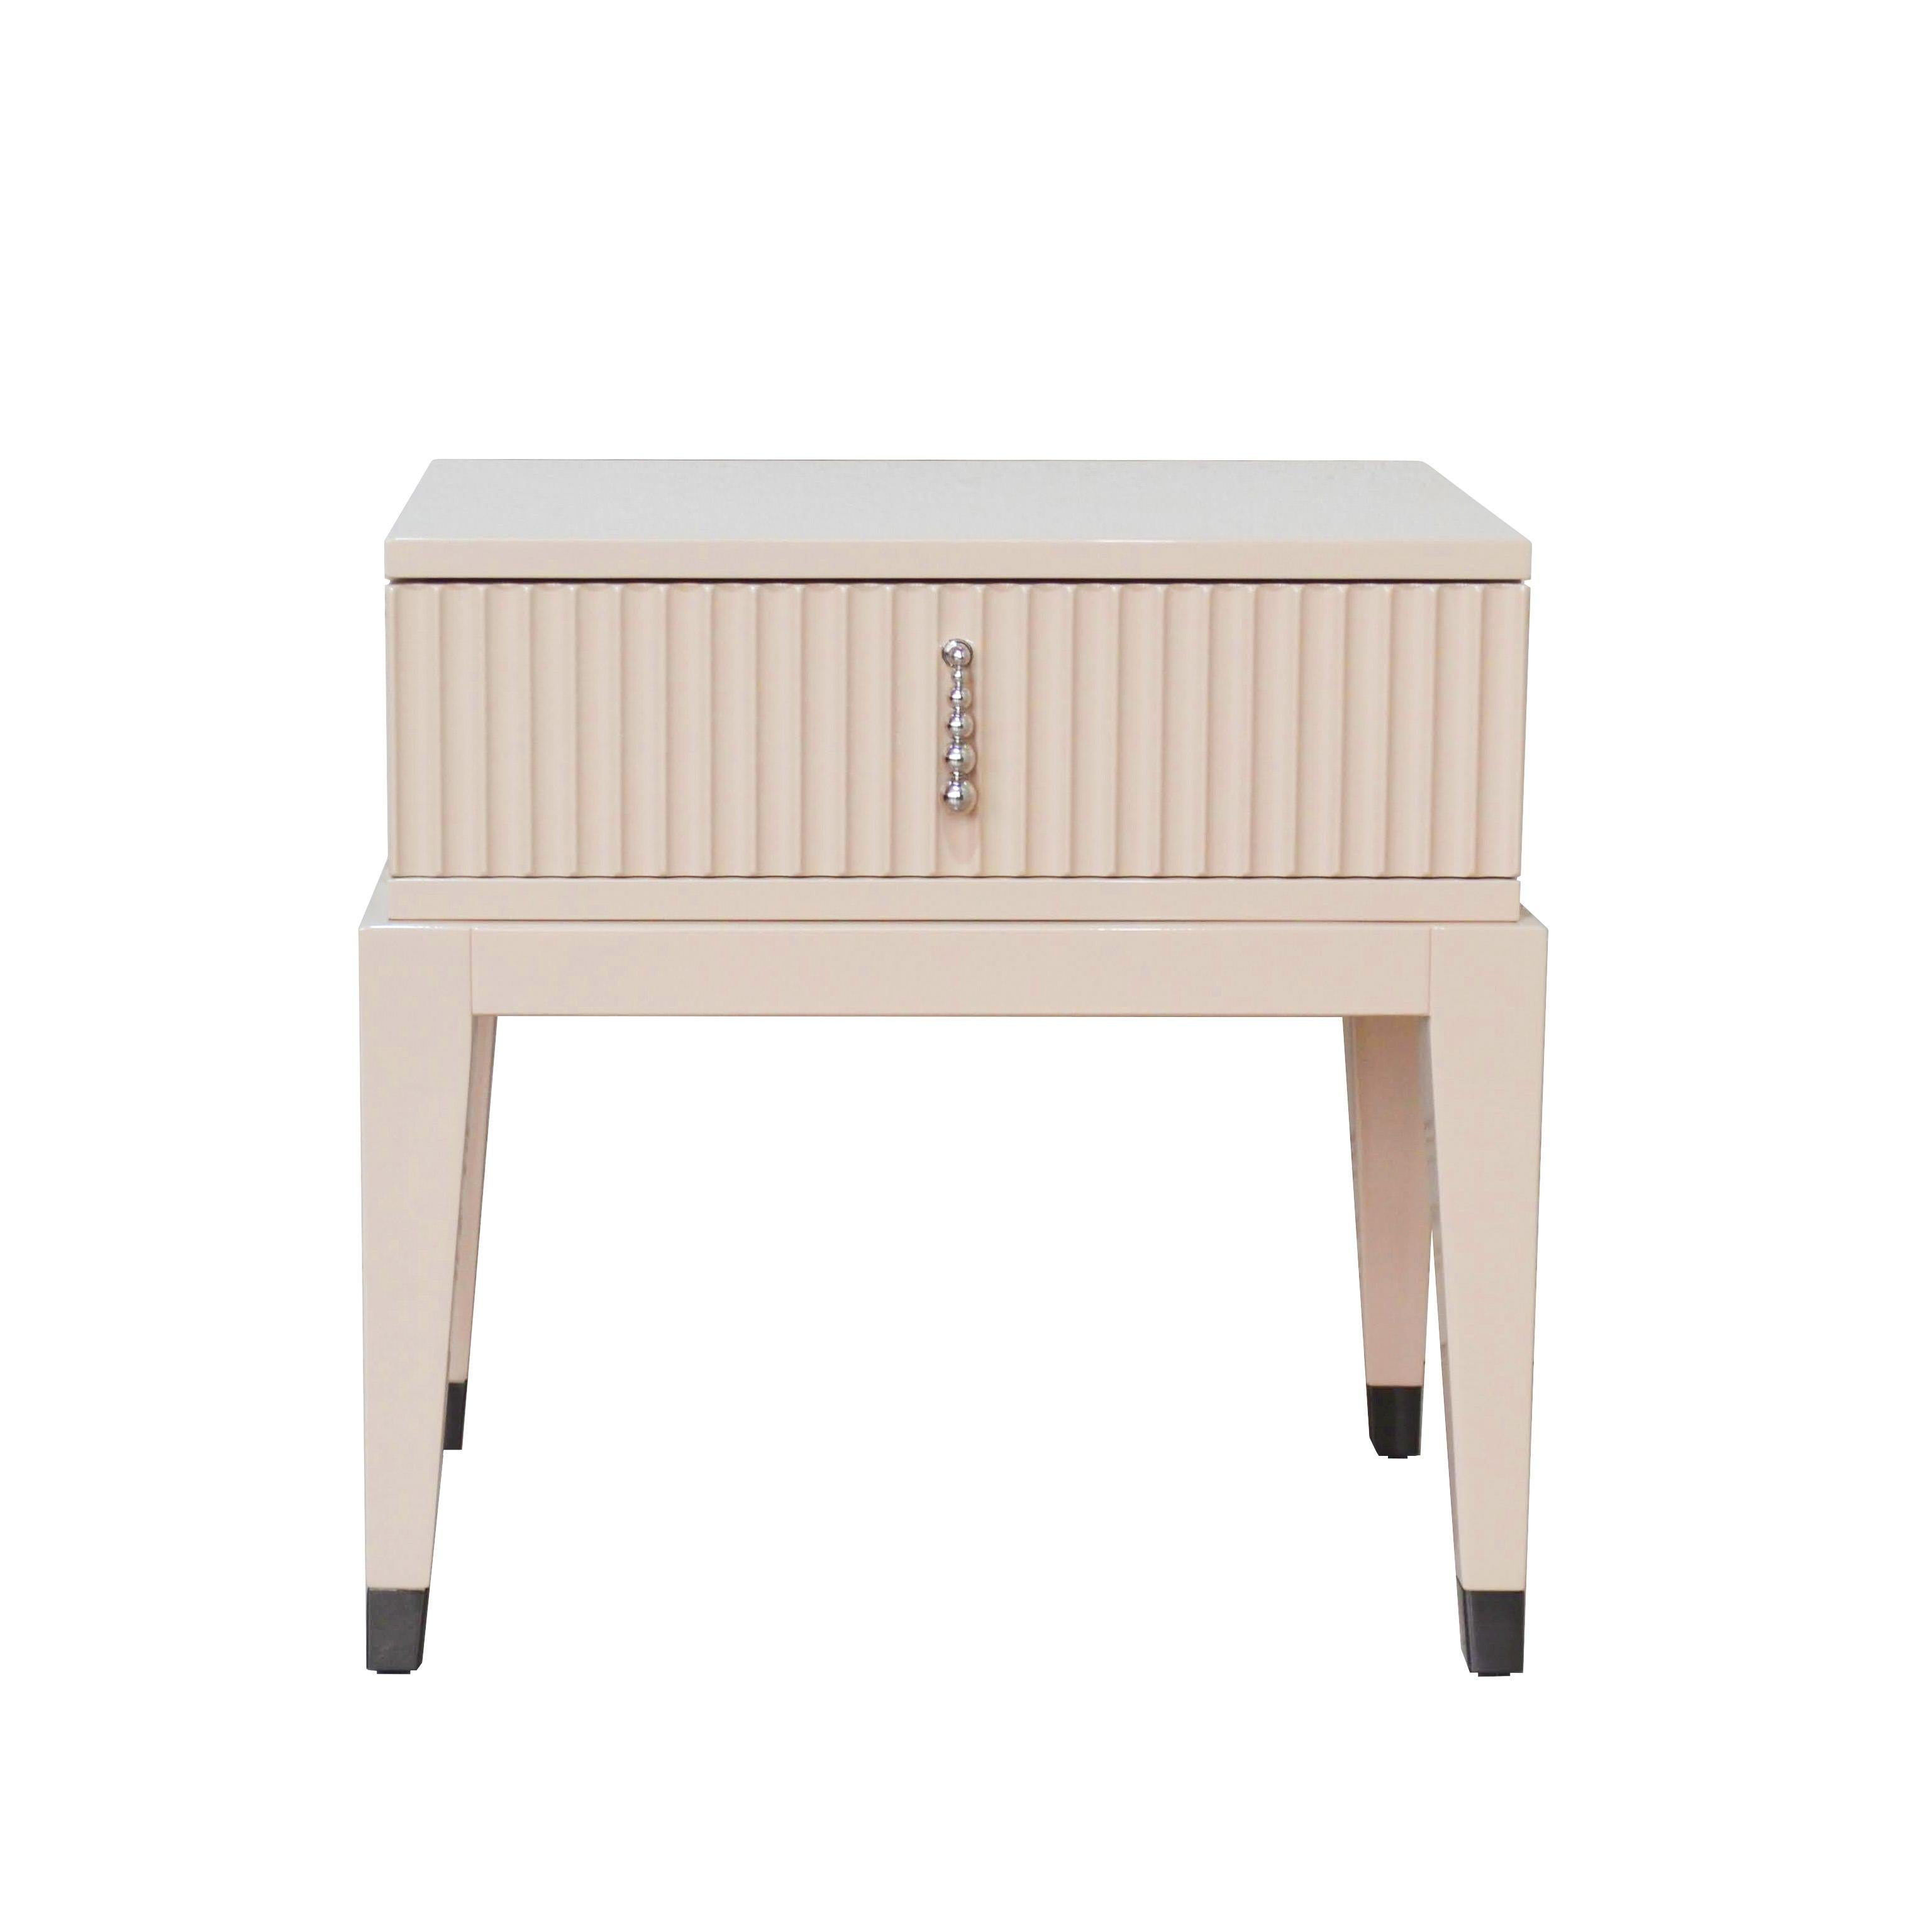 A delightful accent piece to complement refined modern bedrooms, this night table couples sleekness and luxury. Easily transferable from the bedroom to the living room, where it can be used as a side table, this piece merges functionality with Art